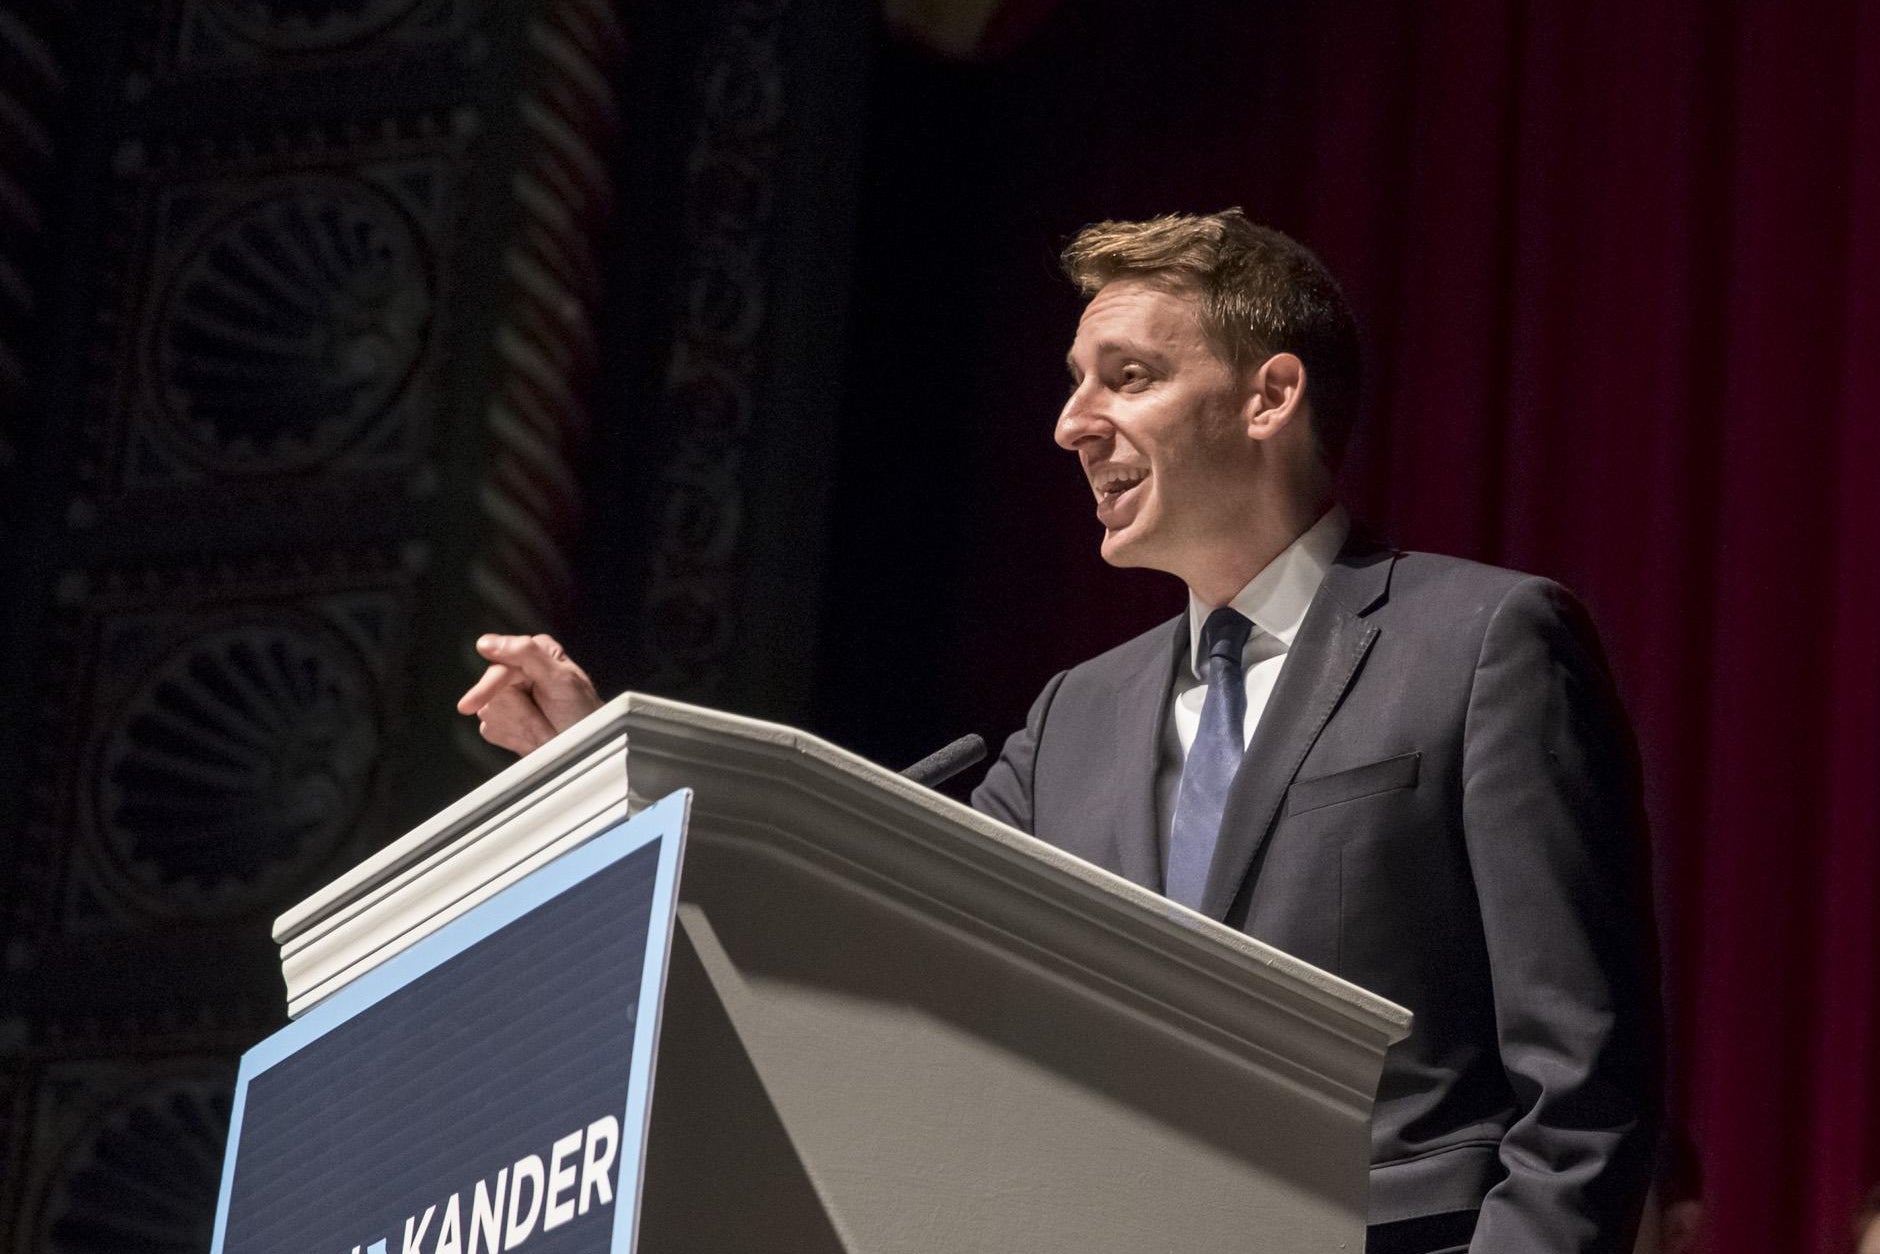 Jason Kander points as he stands behind a podium.